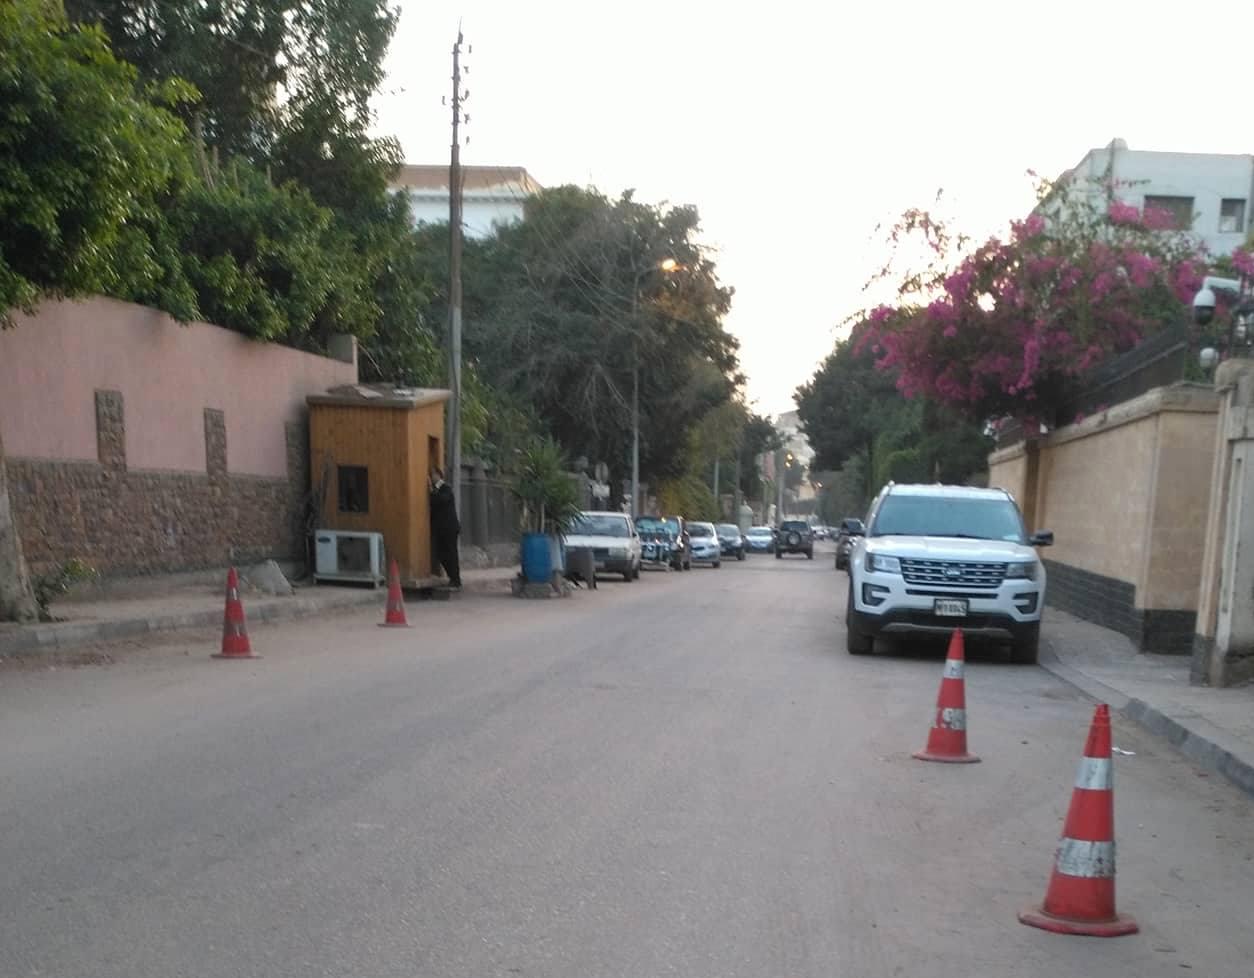 The entrance to the Shaher Abdulhak-family’s residence i Heliopolis, Cairo is seen to the left in this street. A journalist from the investigative network ARIJ has made this photograph on behalf of Aftenposten. He was chased away by armed guards shortly after the picture was taken.